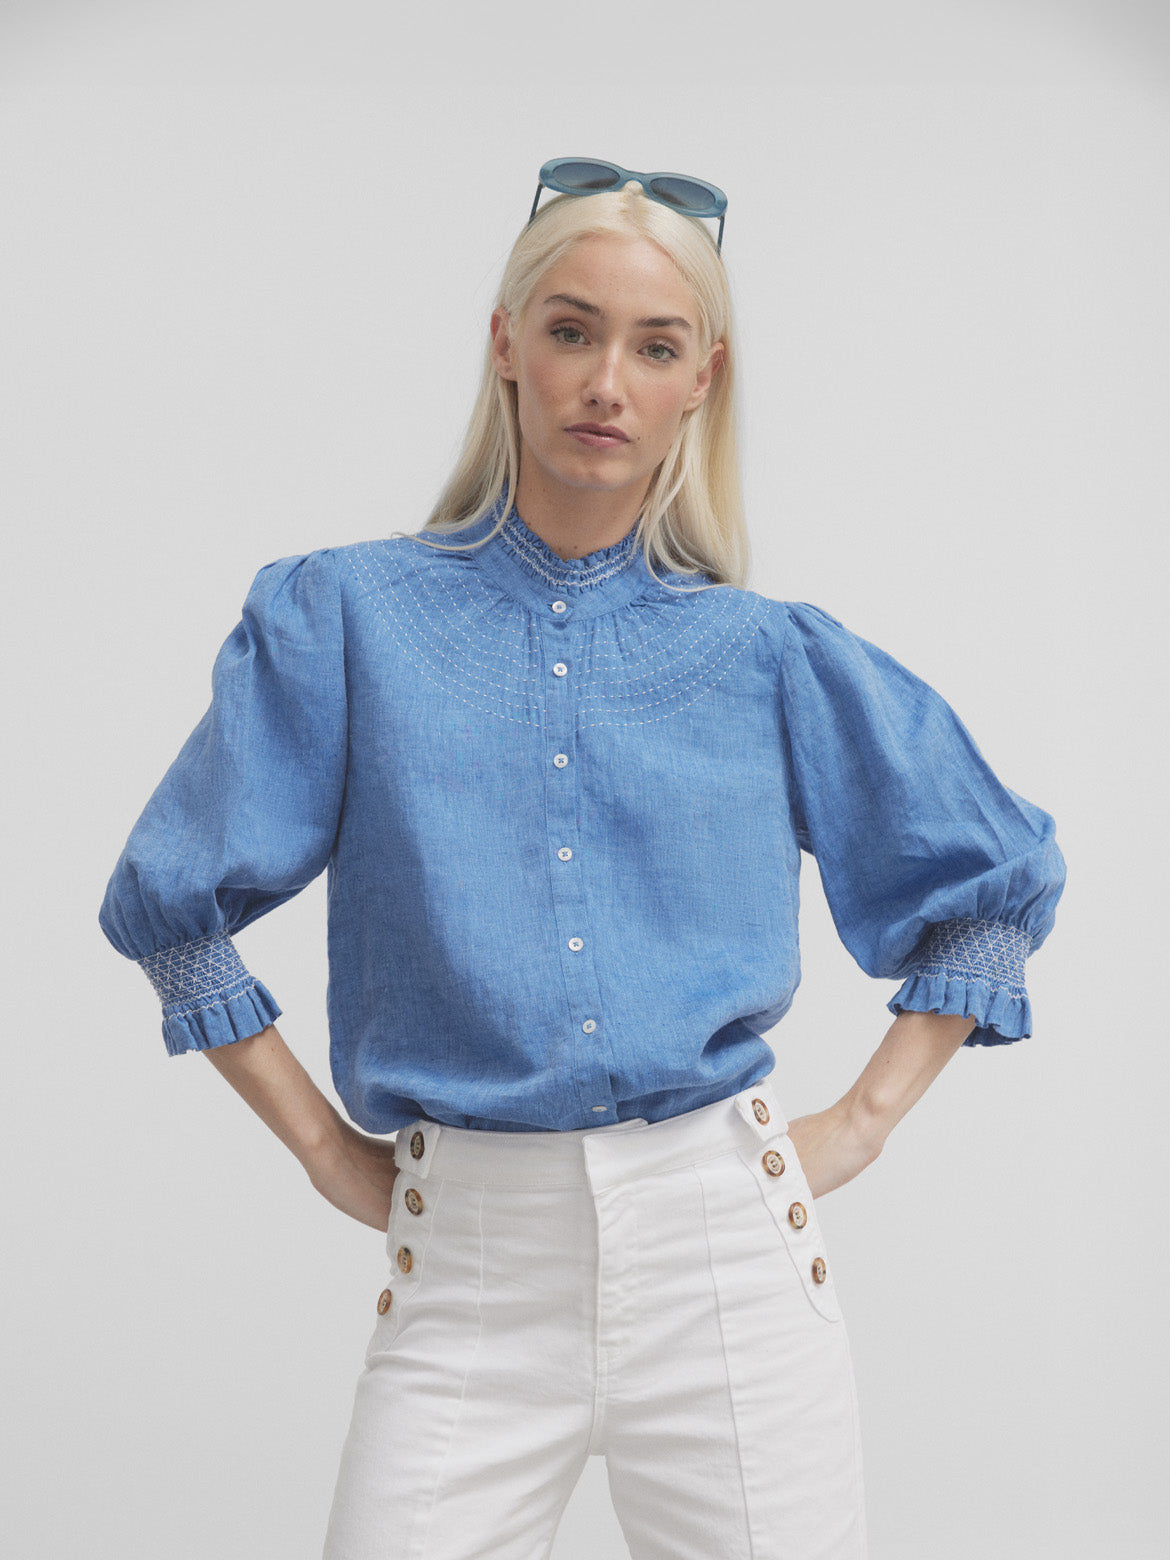 Blue linen French sleeve gathered shirt